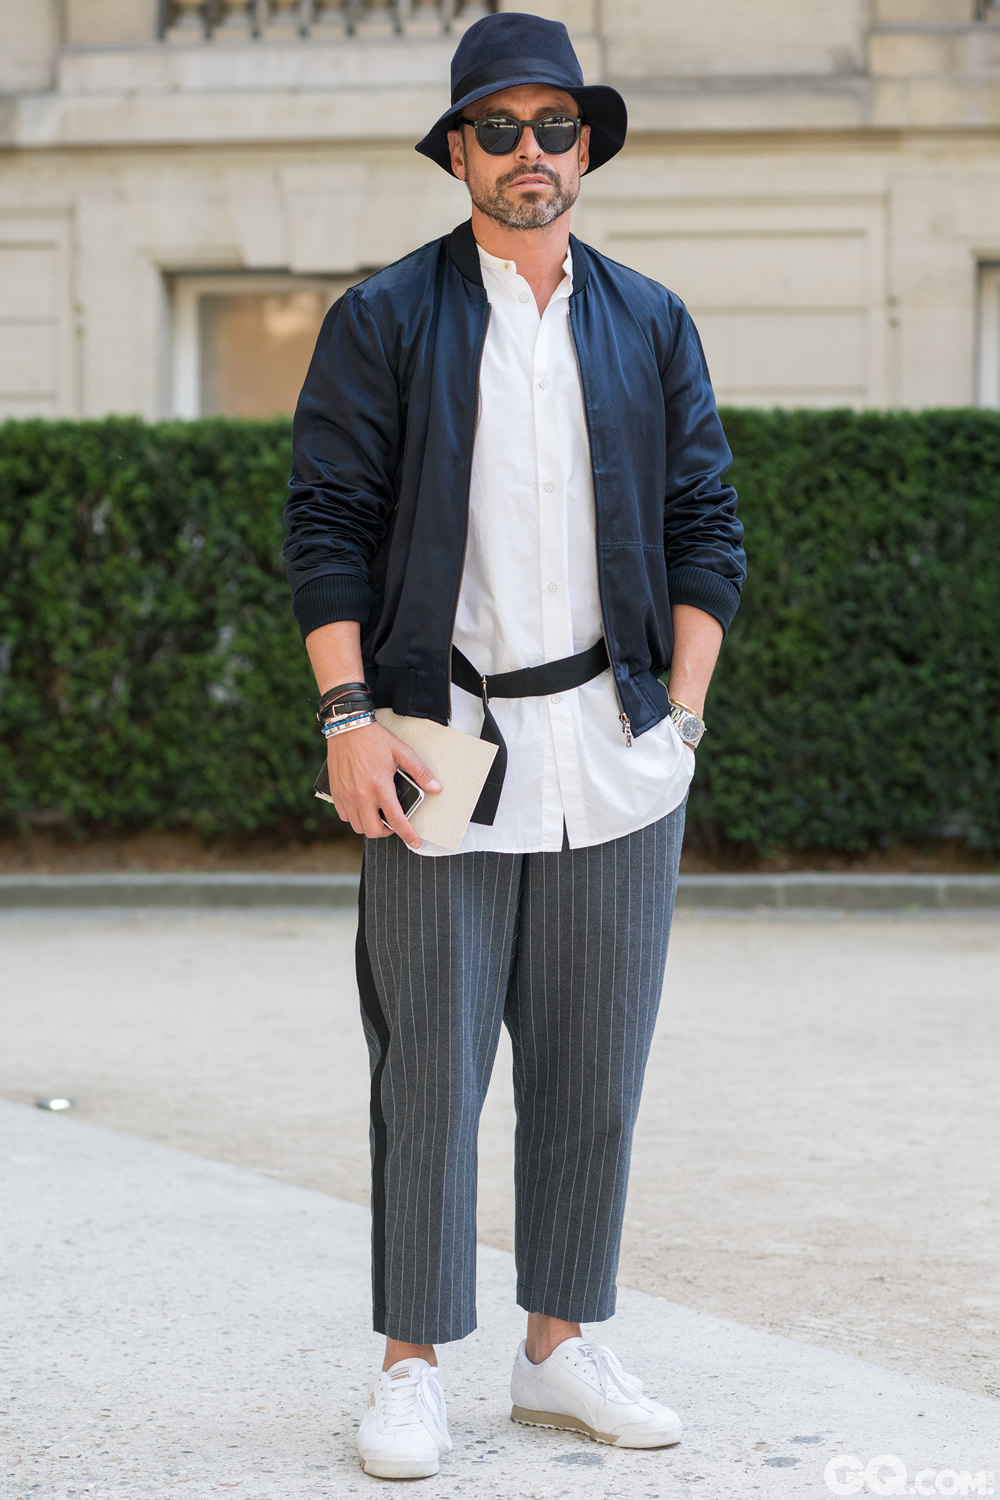 Alex
Hat: Borsalino
Jacket: Dries Van Noten
Shirt: Rag & Bone
Pants: Sacai
Sneakers: Rebook

Inspiration: I just wanted to play with color blocking and between blue and white
Oldest piece: My hat bought a few years ago in Milan
（我只想玩转蓝白色块的配搭）